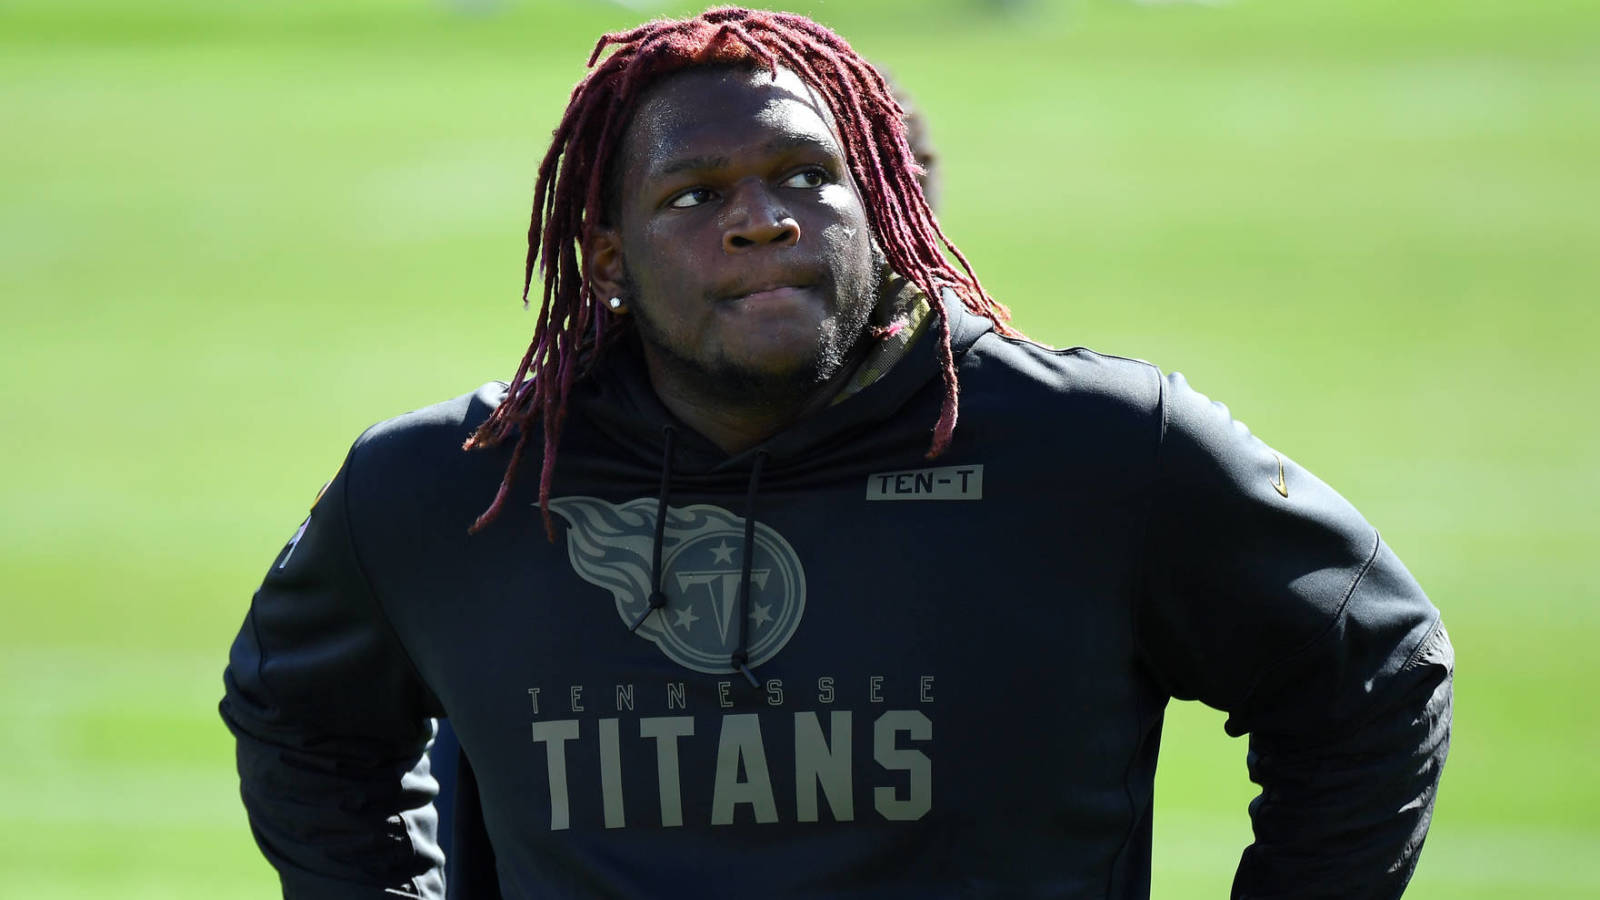 Titans were done with 2020 first-round pick Isaiah Wilson after police chase